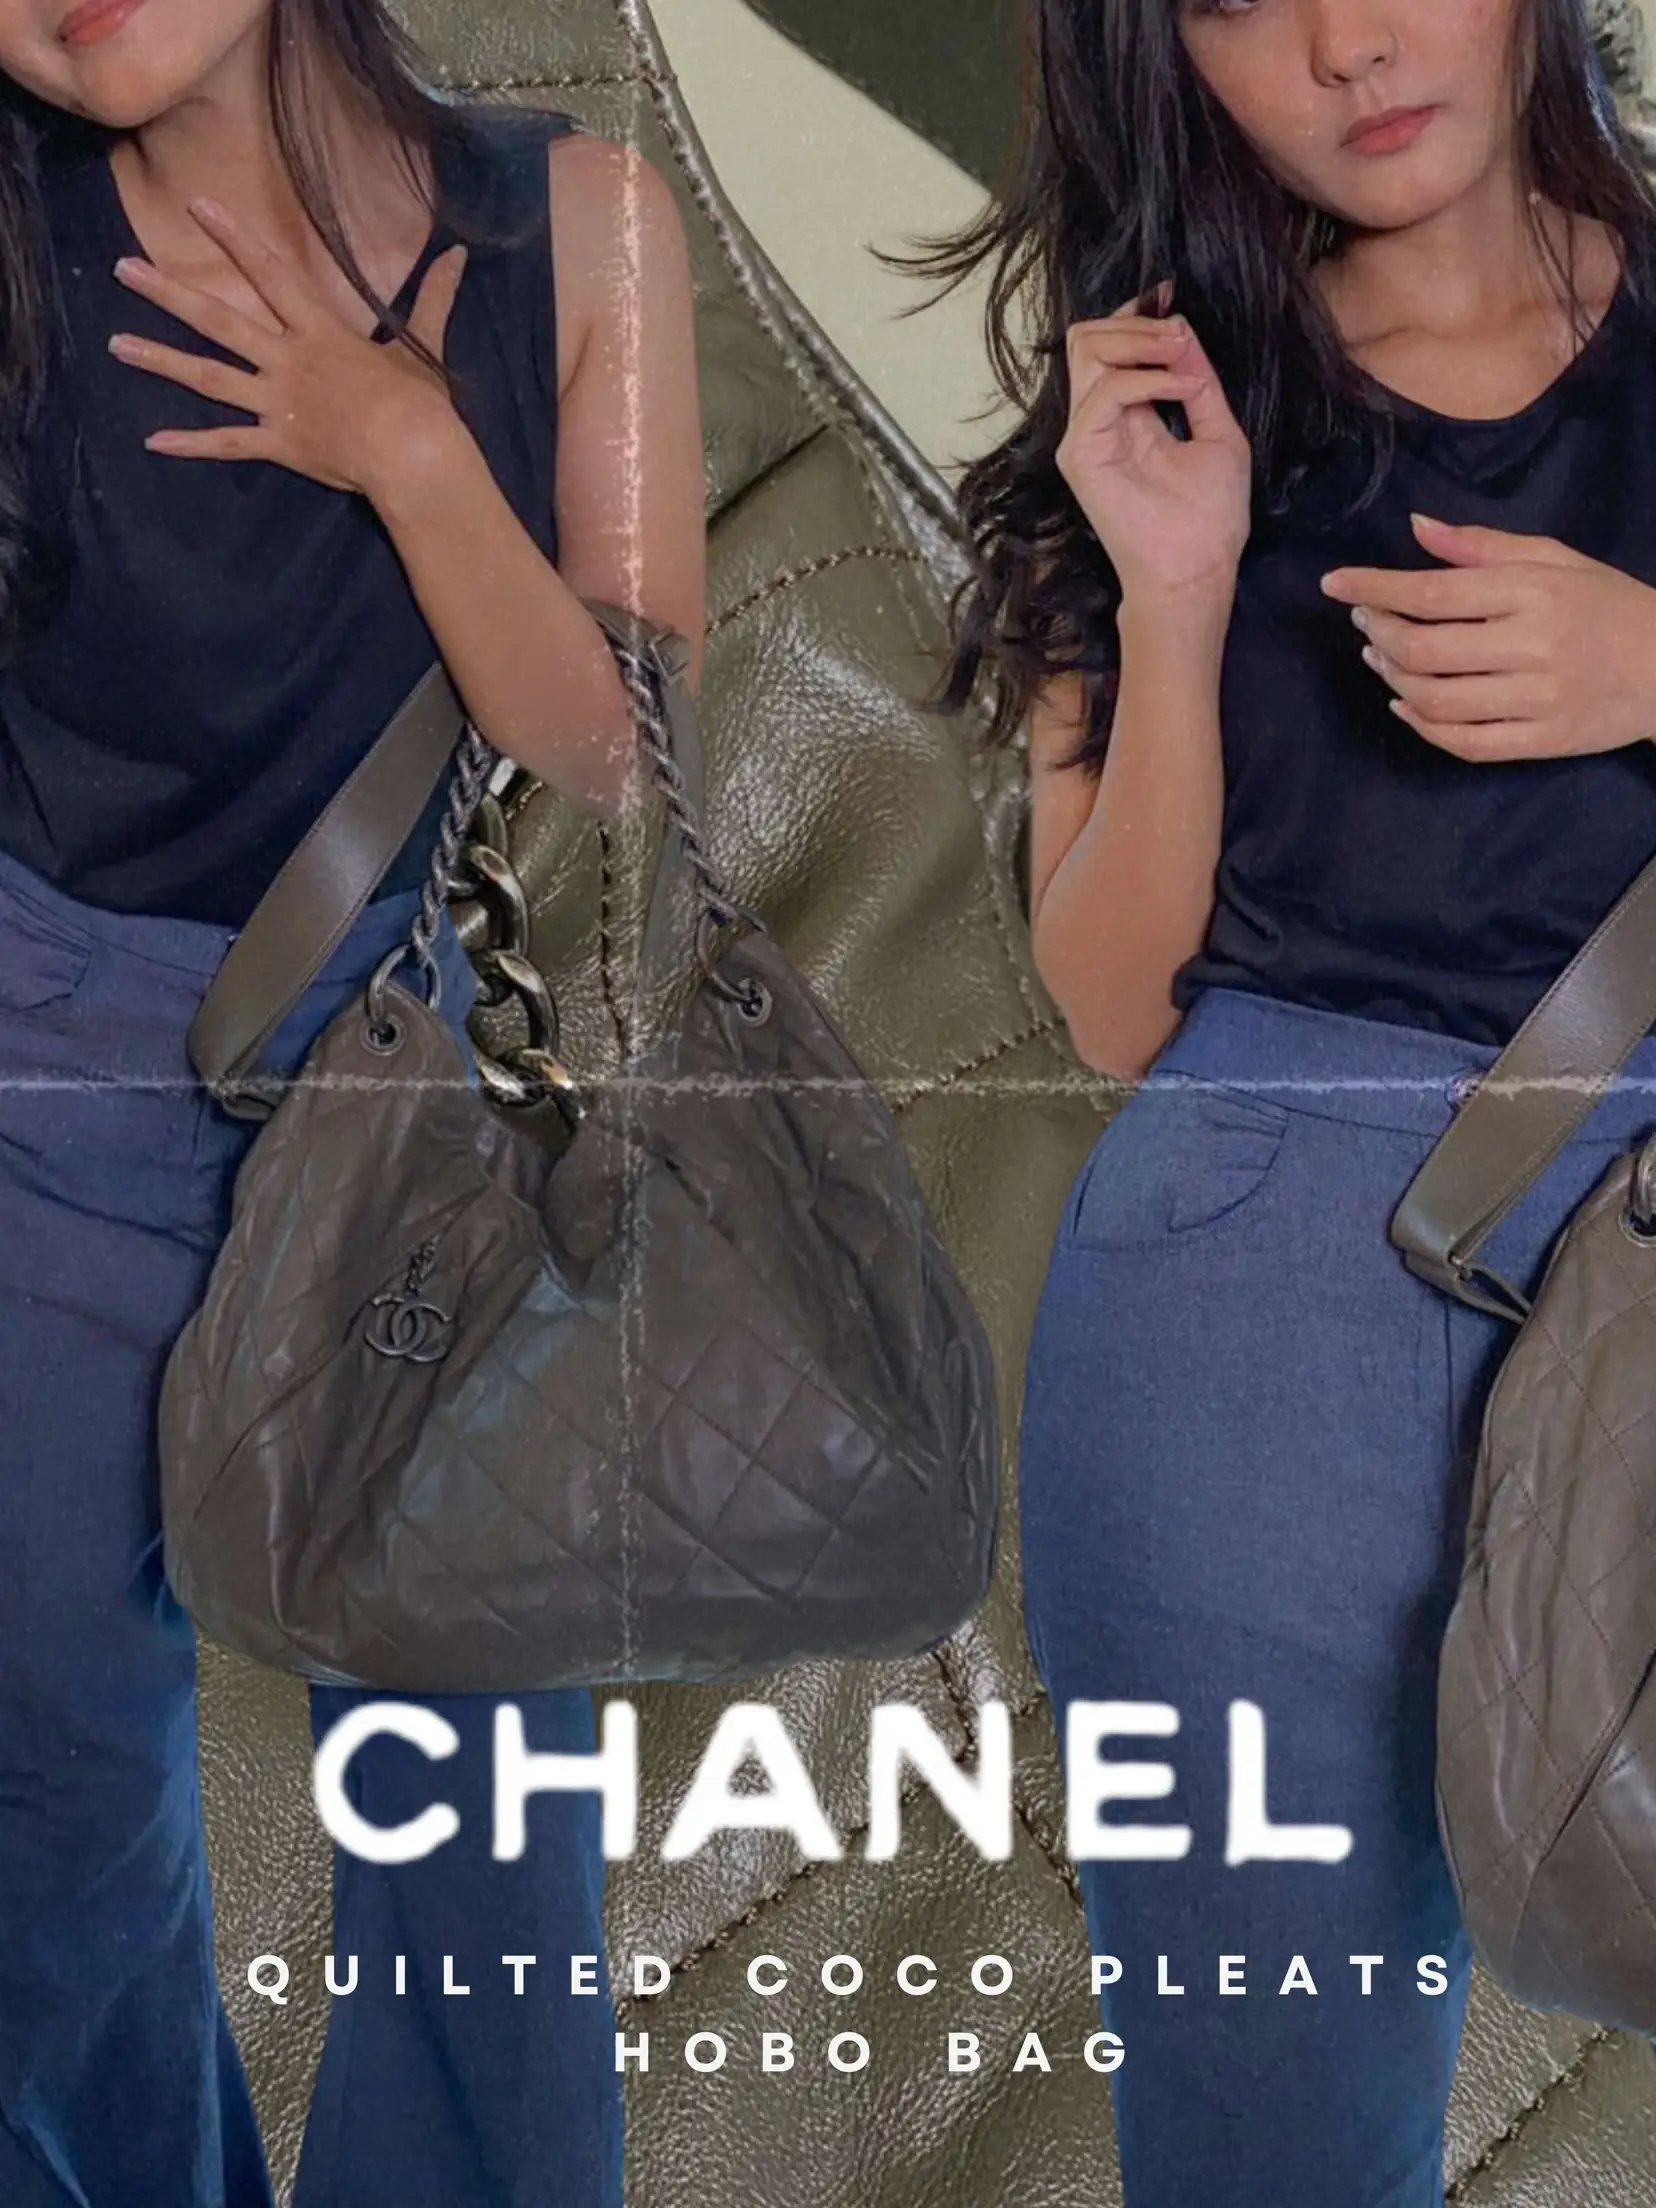 Luxury Bag Review: CHANEL Quilted Coco Pleats